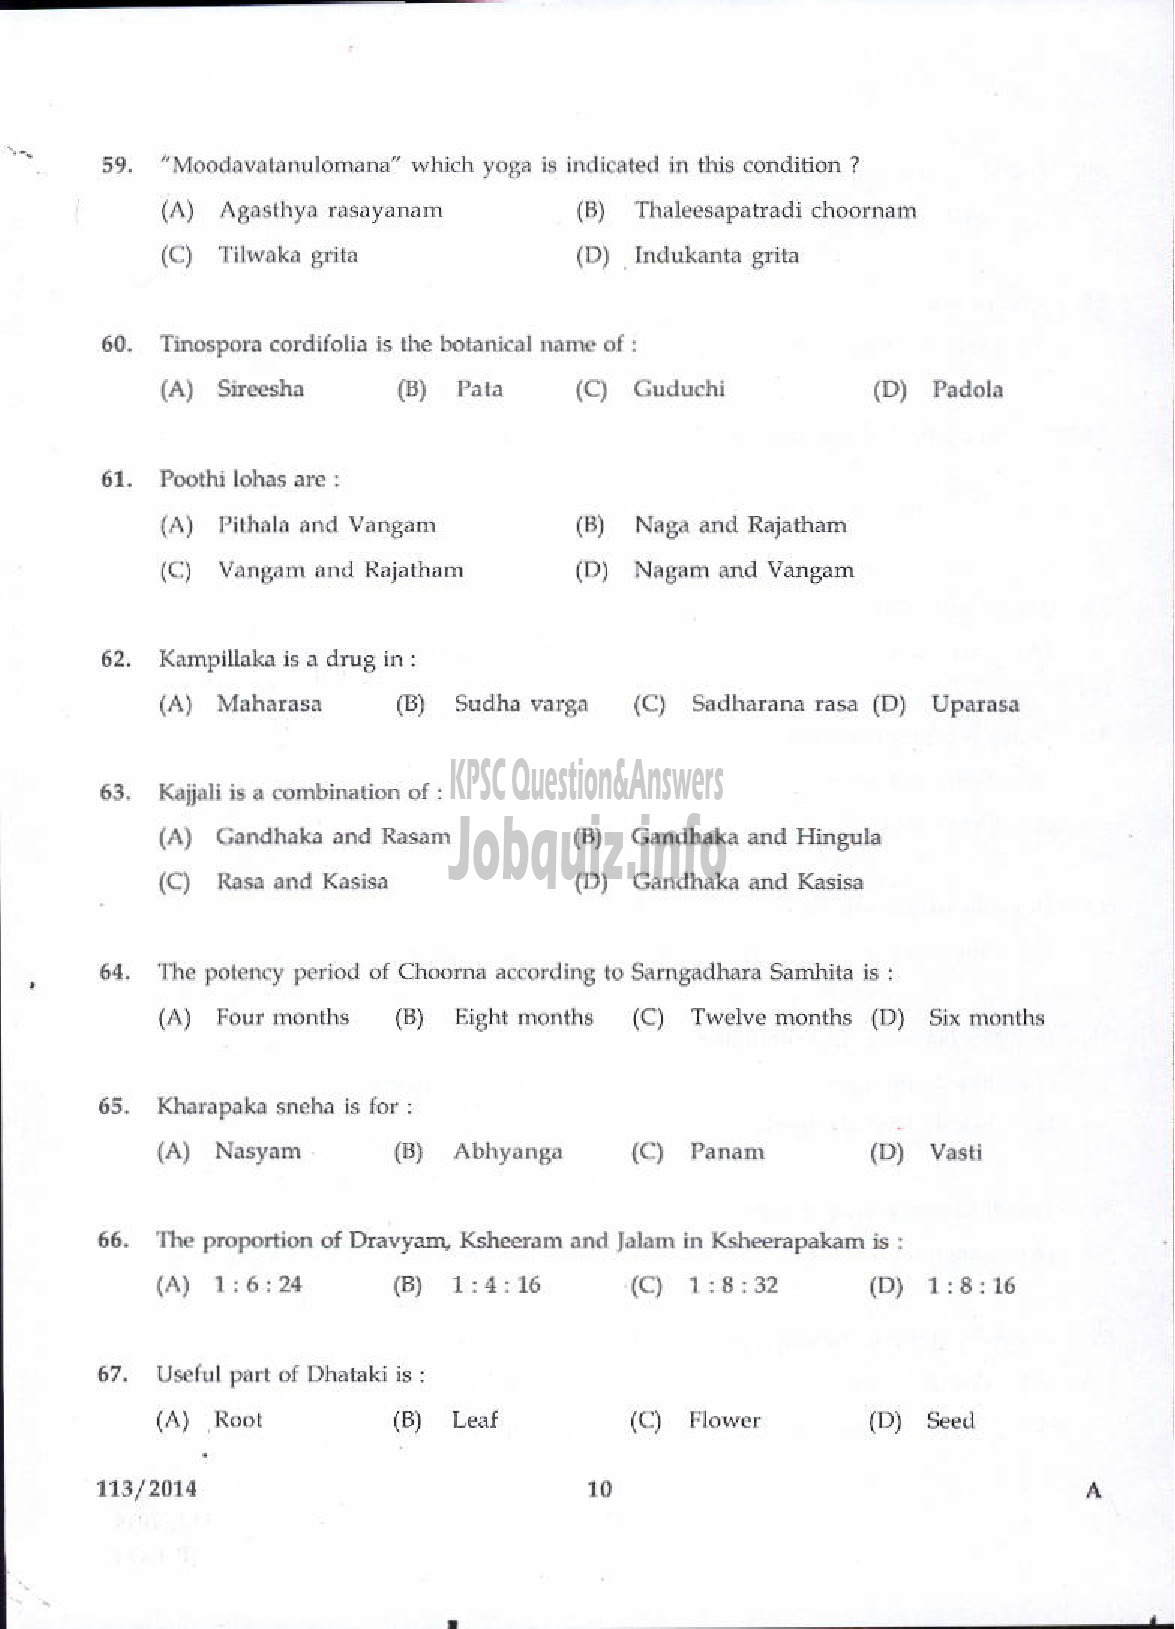 Kerala PSC Question Paper - DRUGS INSPECTOR AYURVEDA DRUGS CONTROL-8